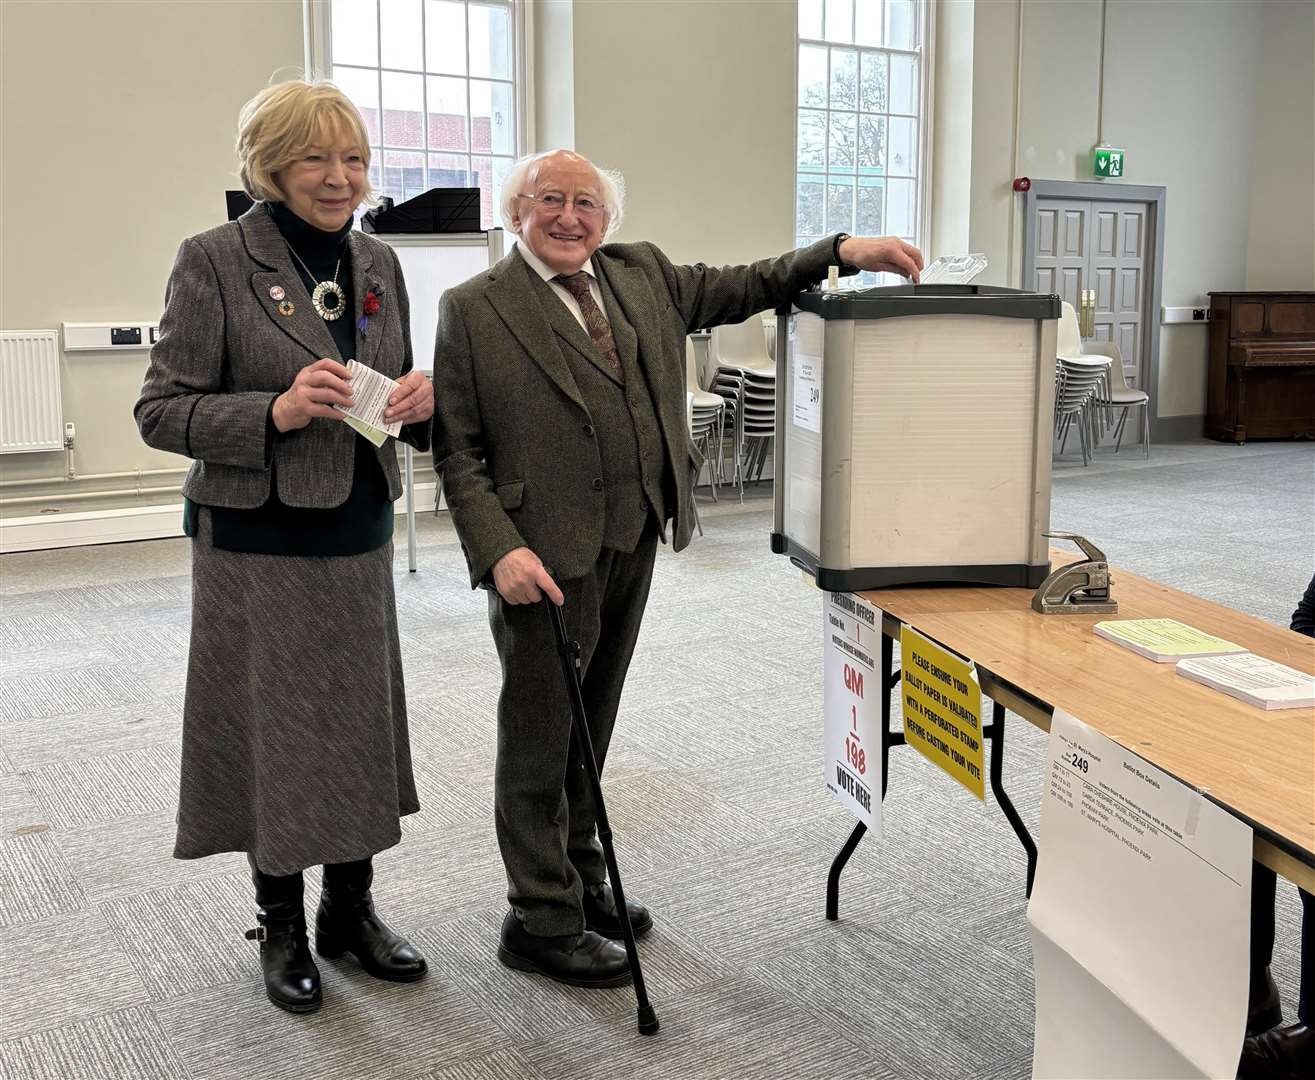 President of Ireland Michael D Higgins and his wife, Sabina, voting at Phoenix Park, Dublin (Cate McCurry/PA)